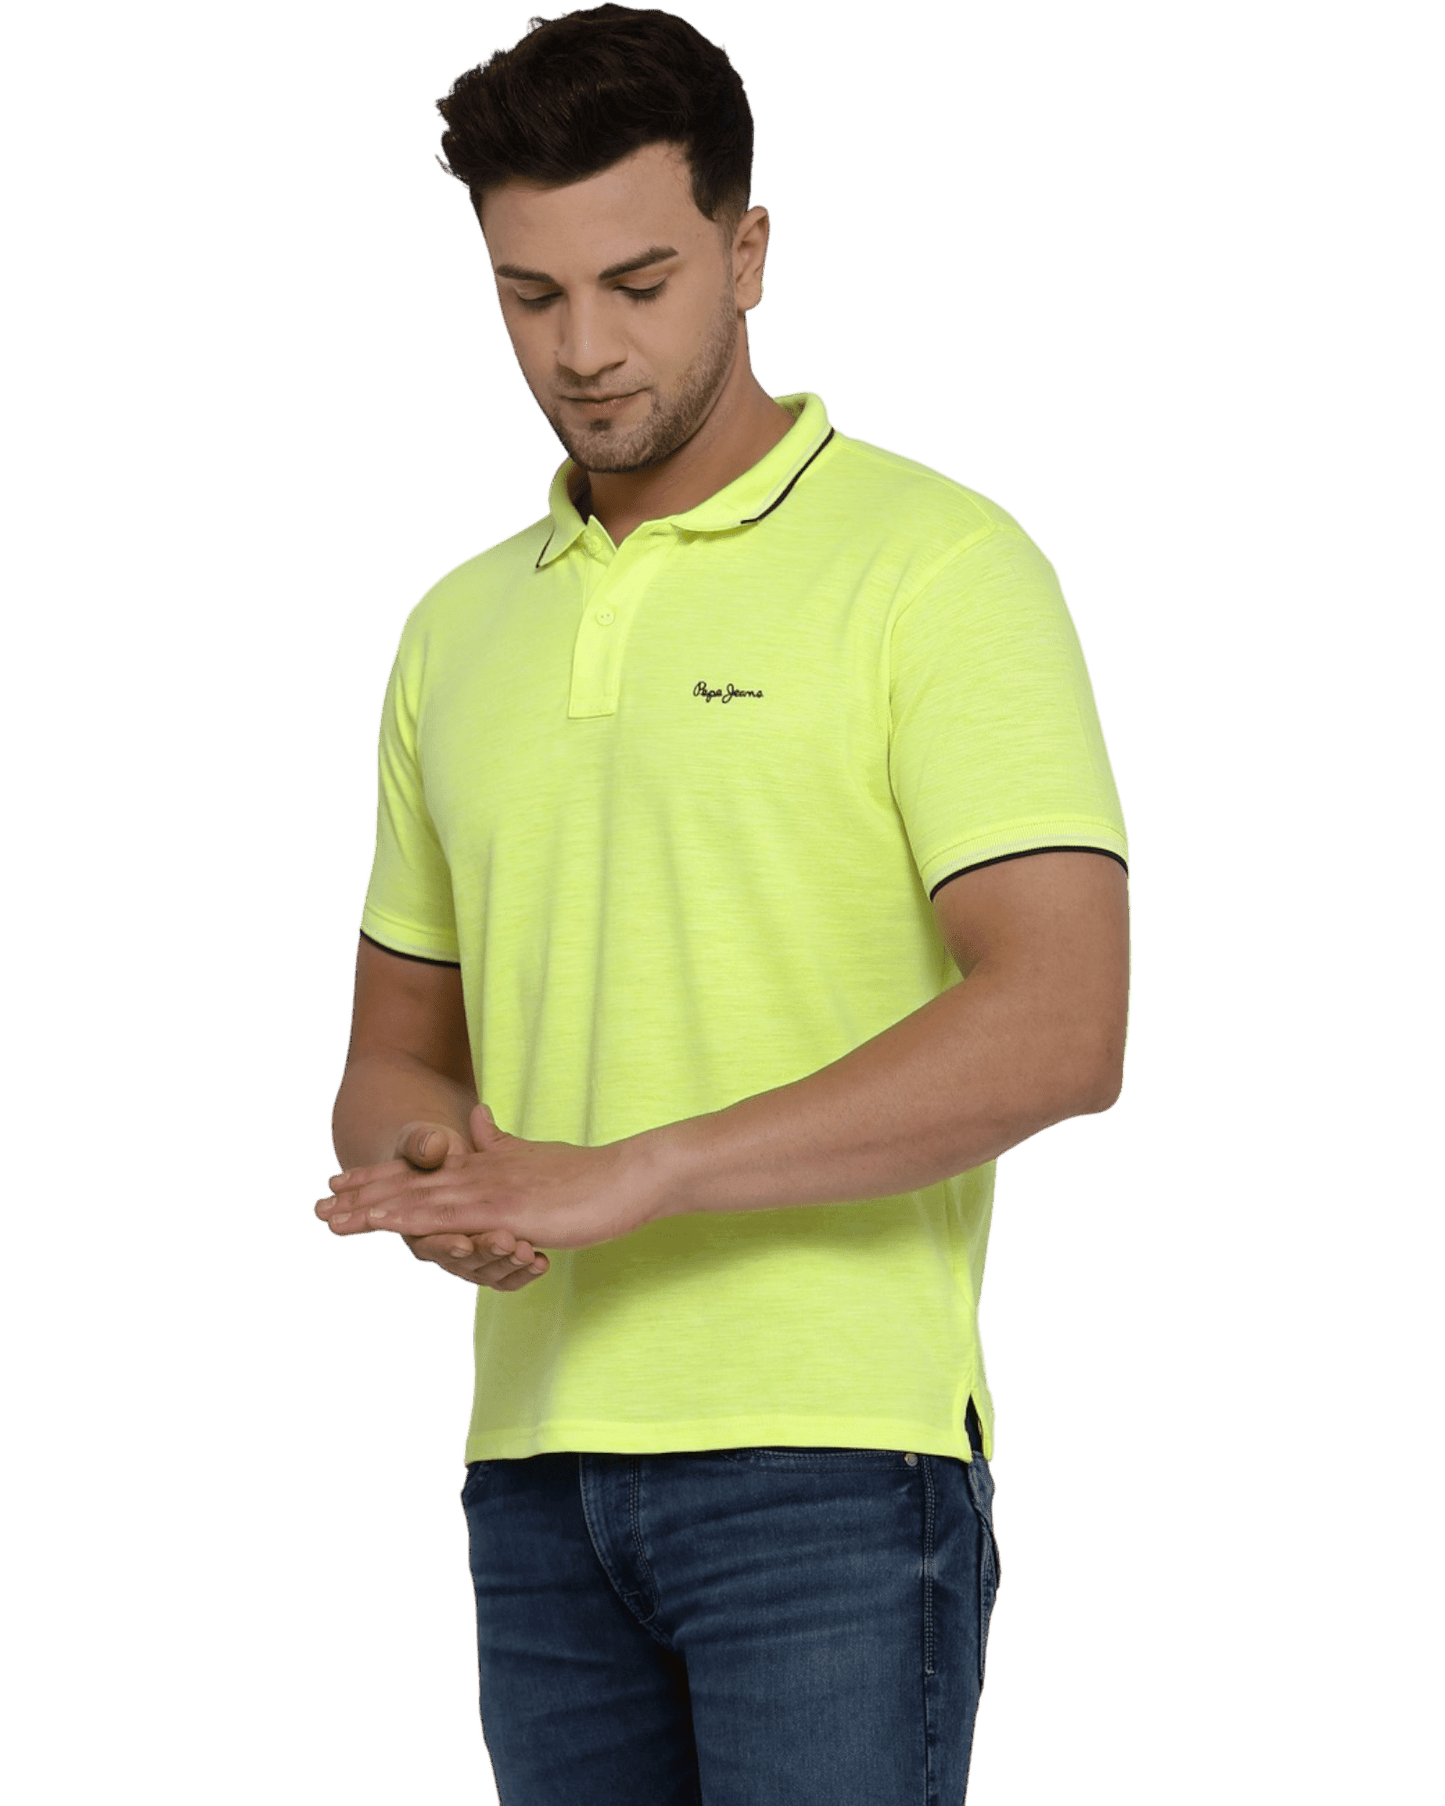 Pepe Jeans Lemon Yellow Short Sleeves Polo T-Shirt - Apparel For Less